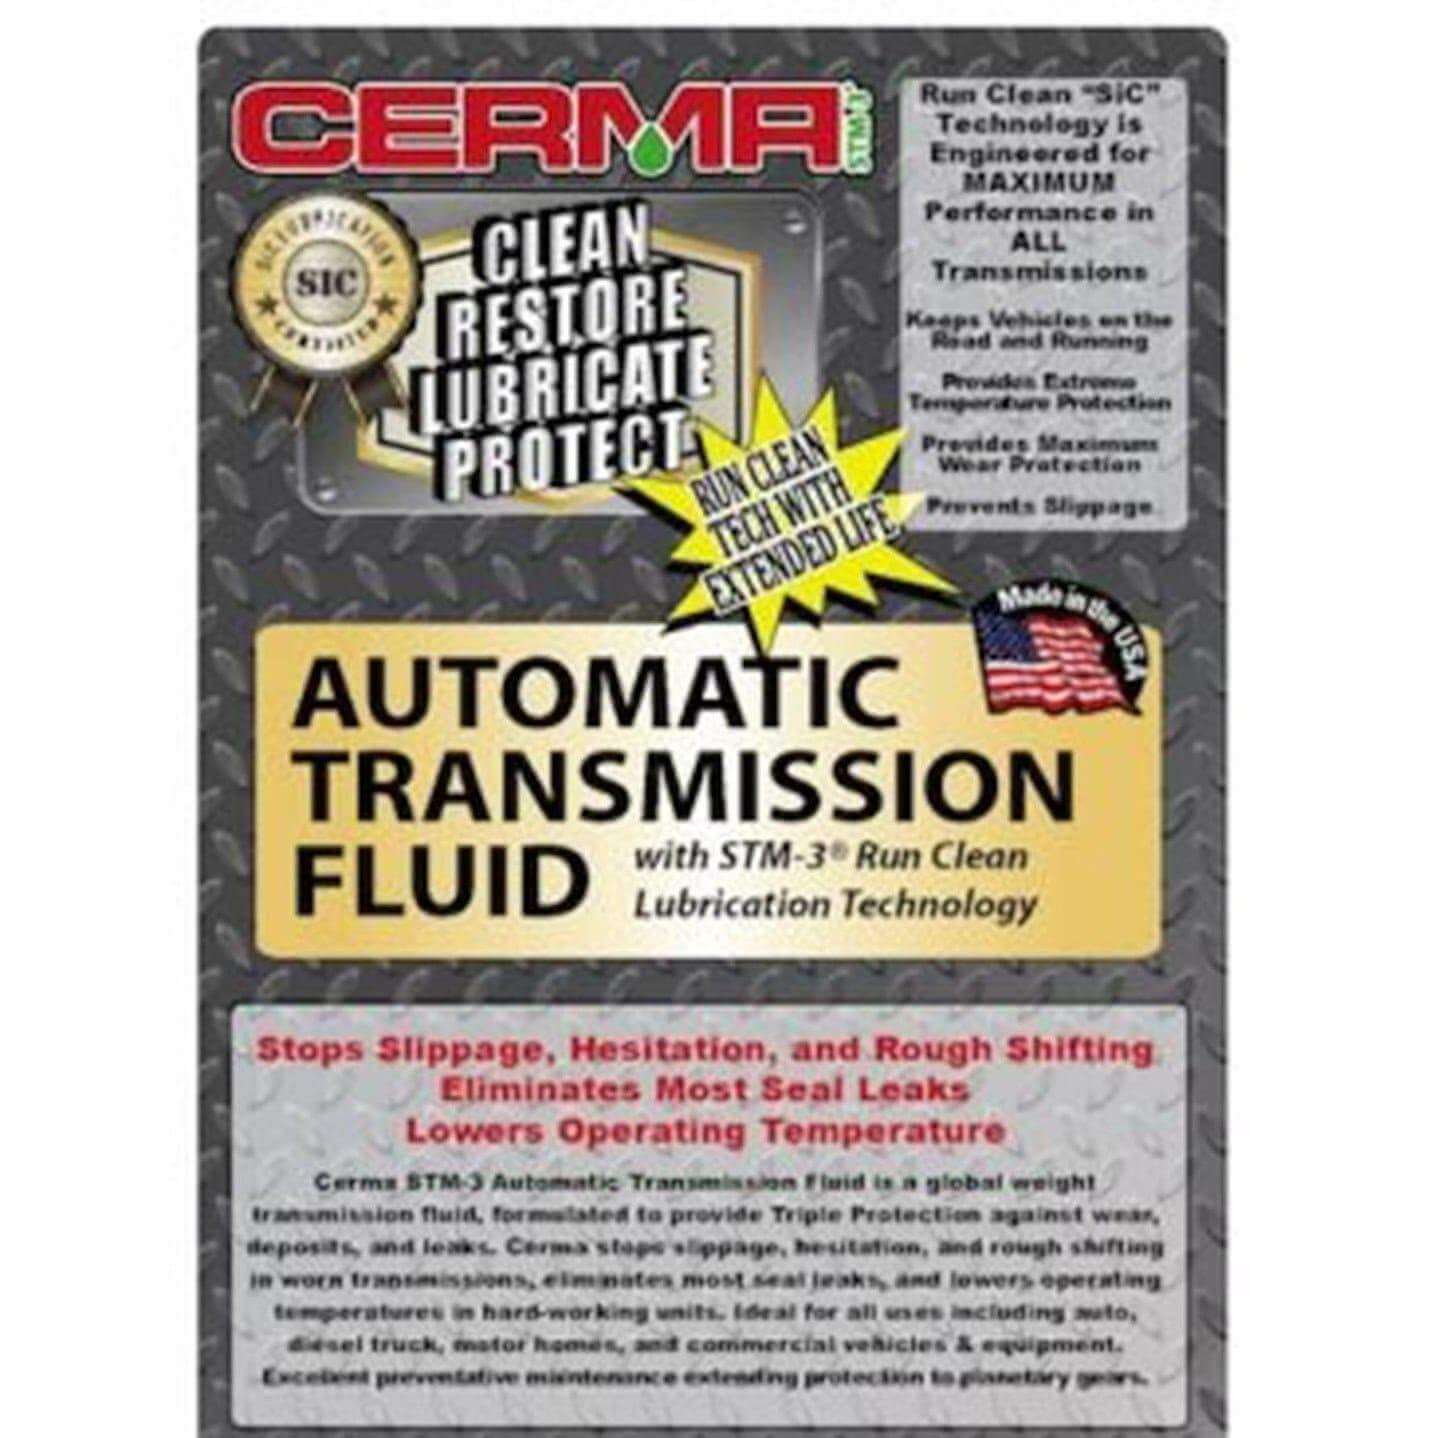 Cerma Ceramic Automatic Transmission Fluid at $14.09 only from cermatreatment.com